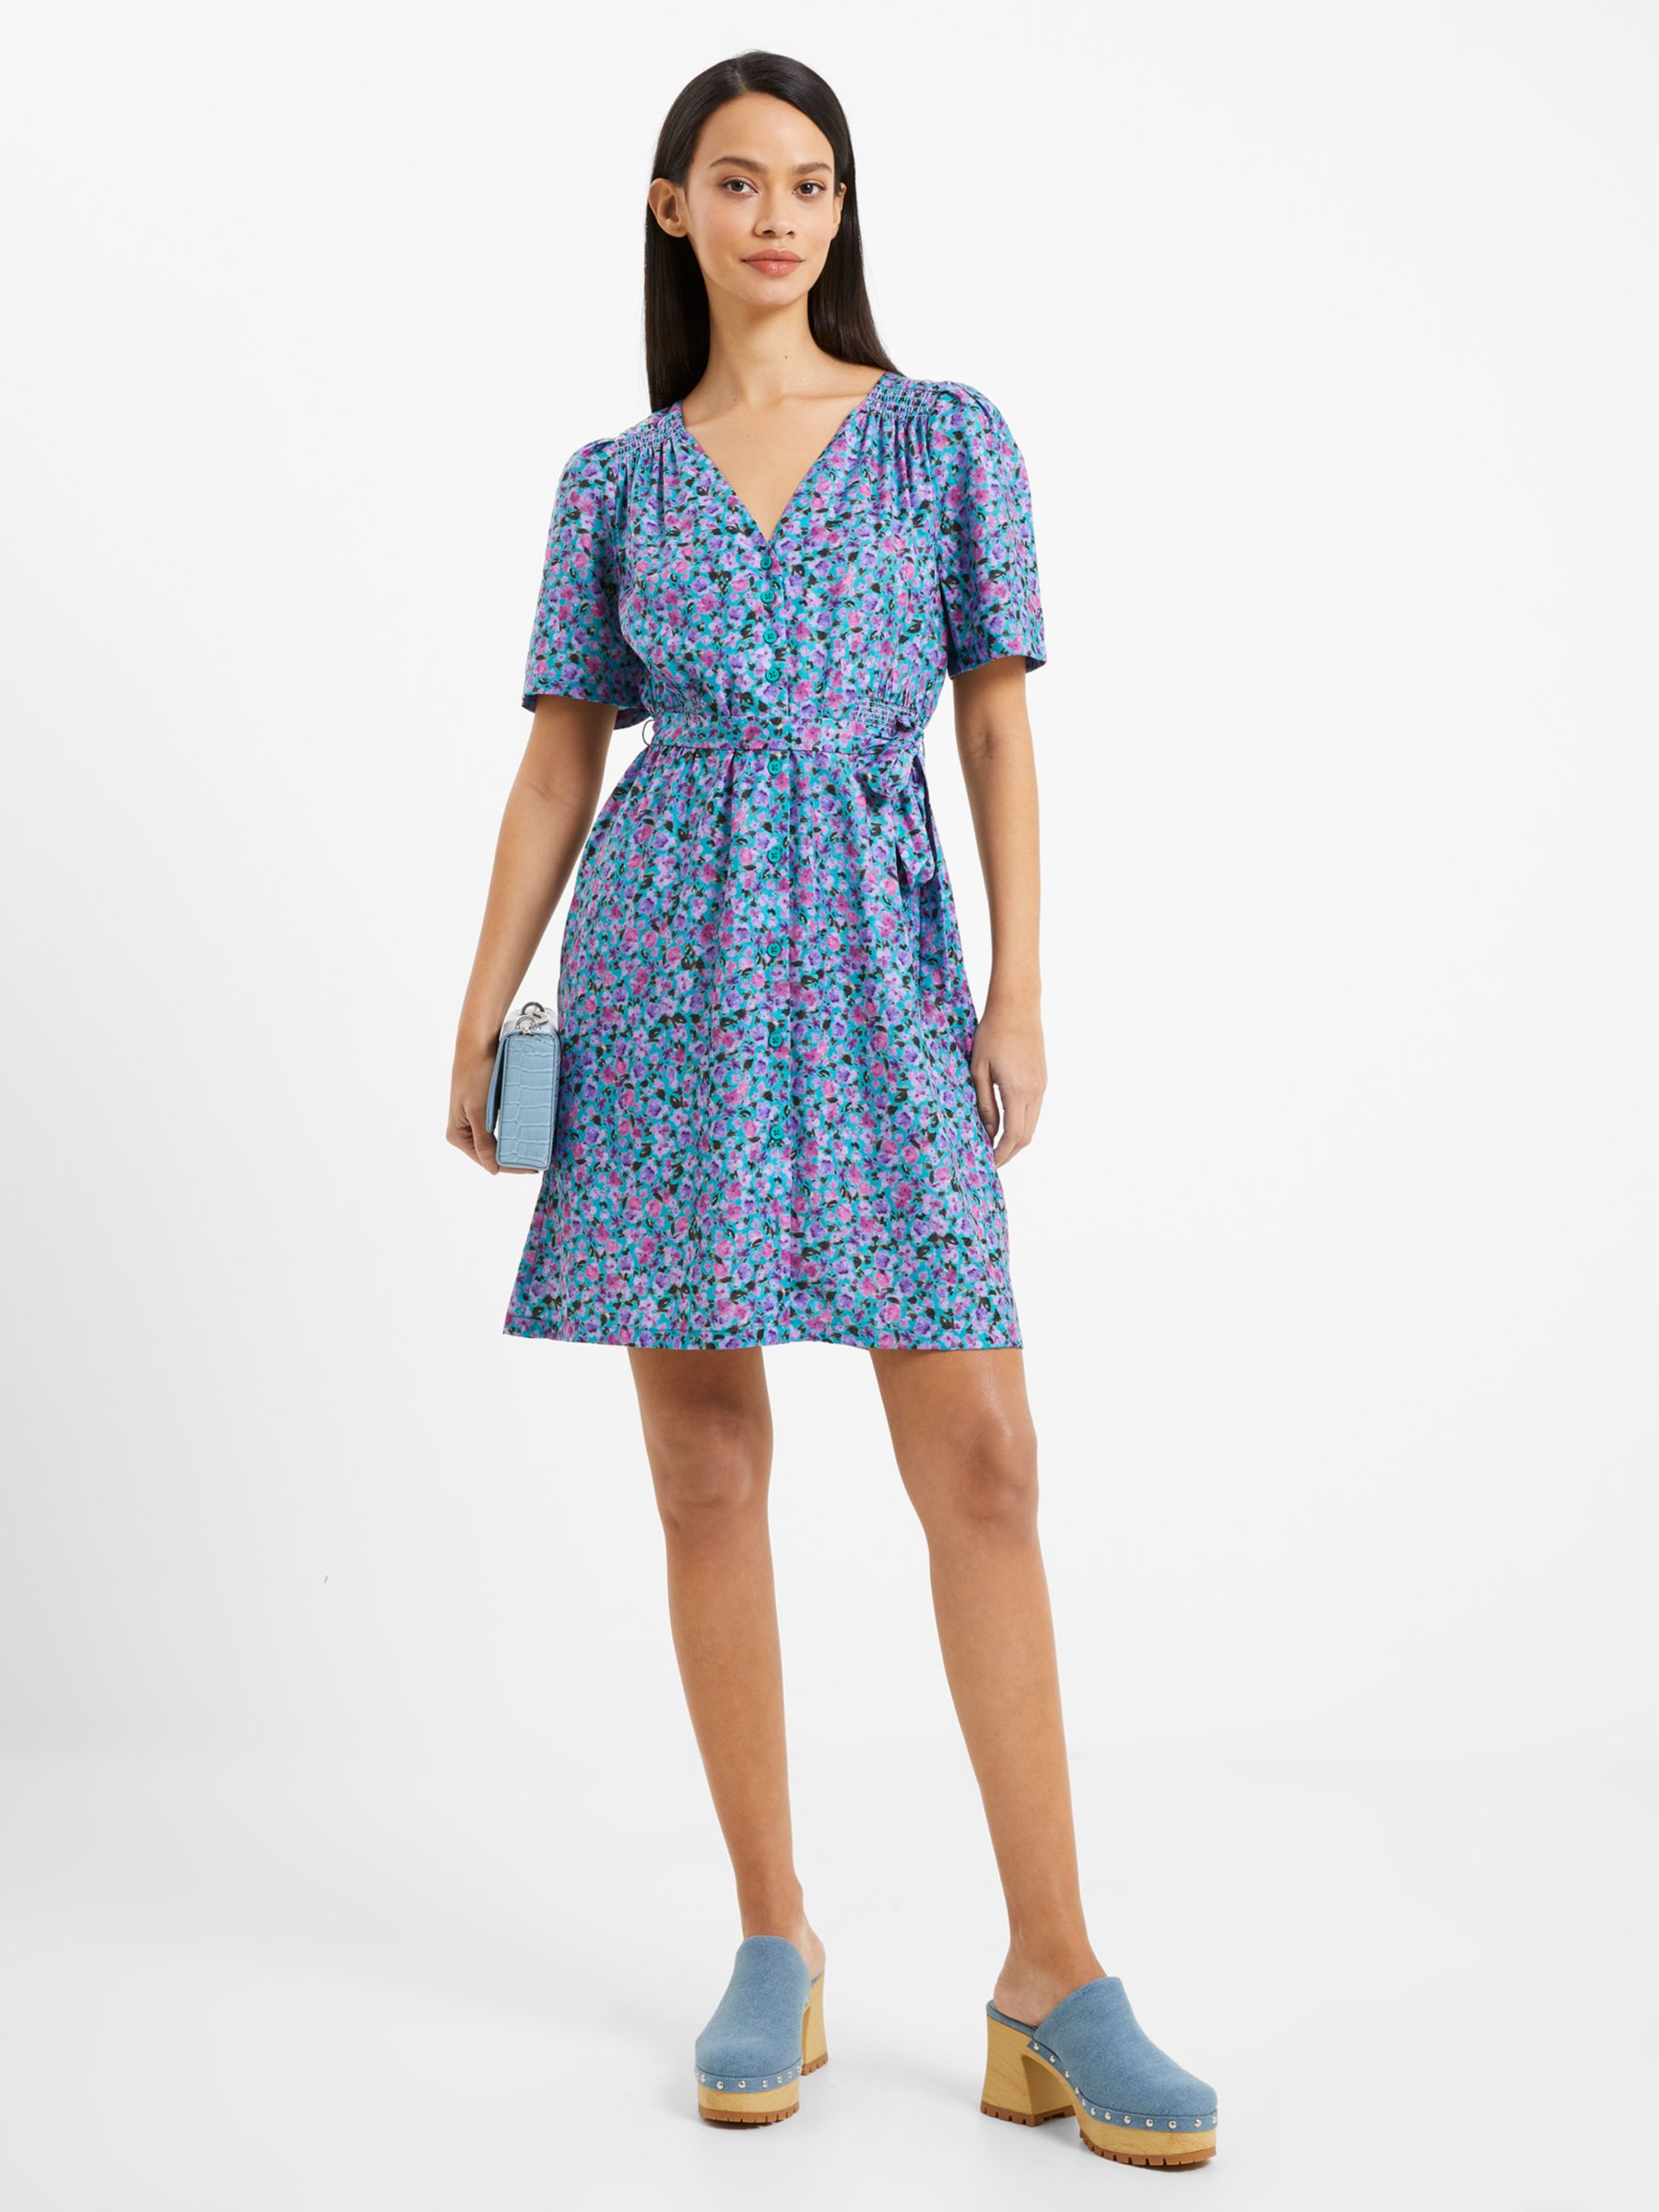 French Connection Alezzia Floral Mini Dress, Jaded Teal, 10